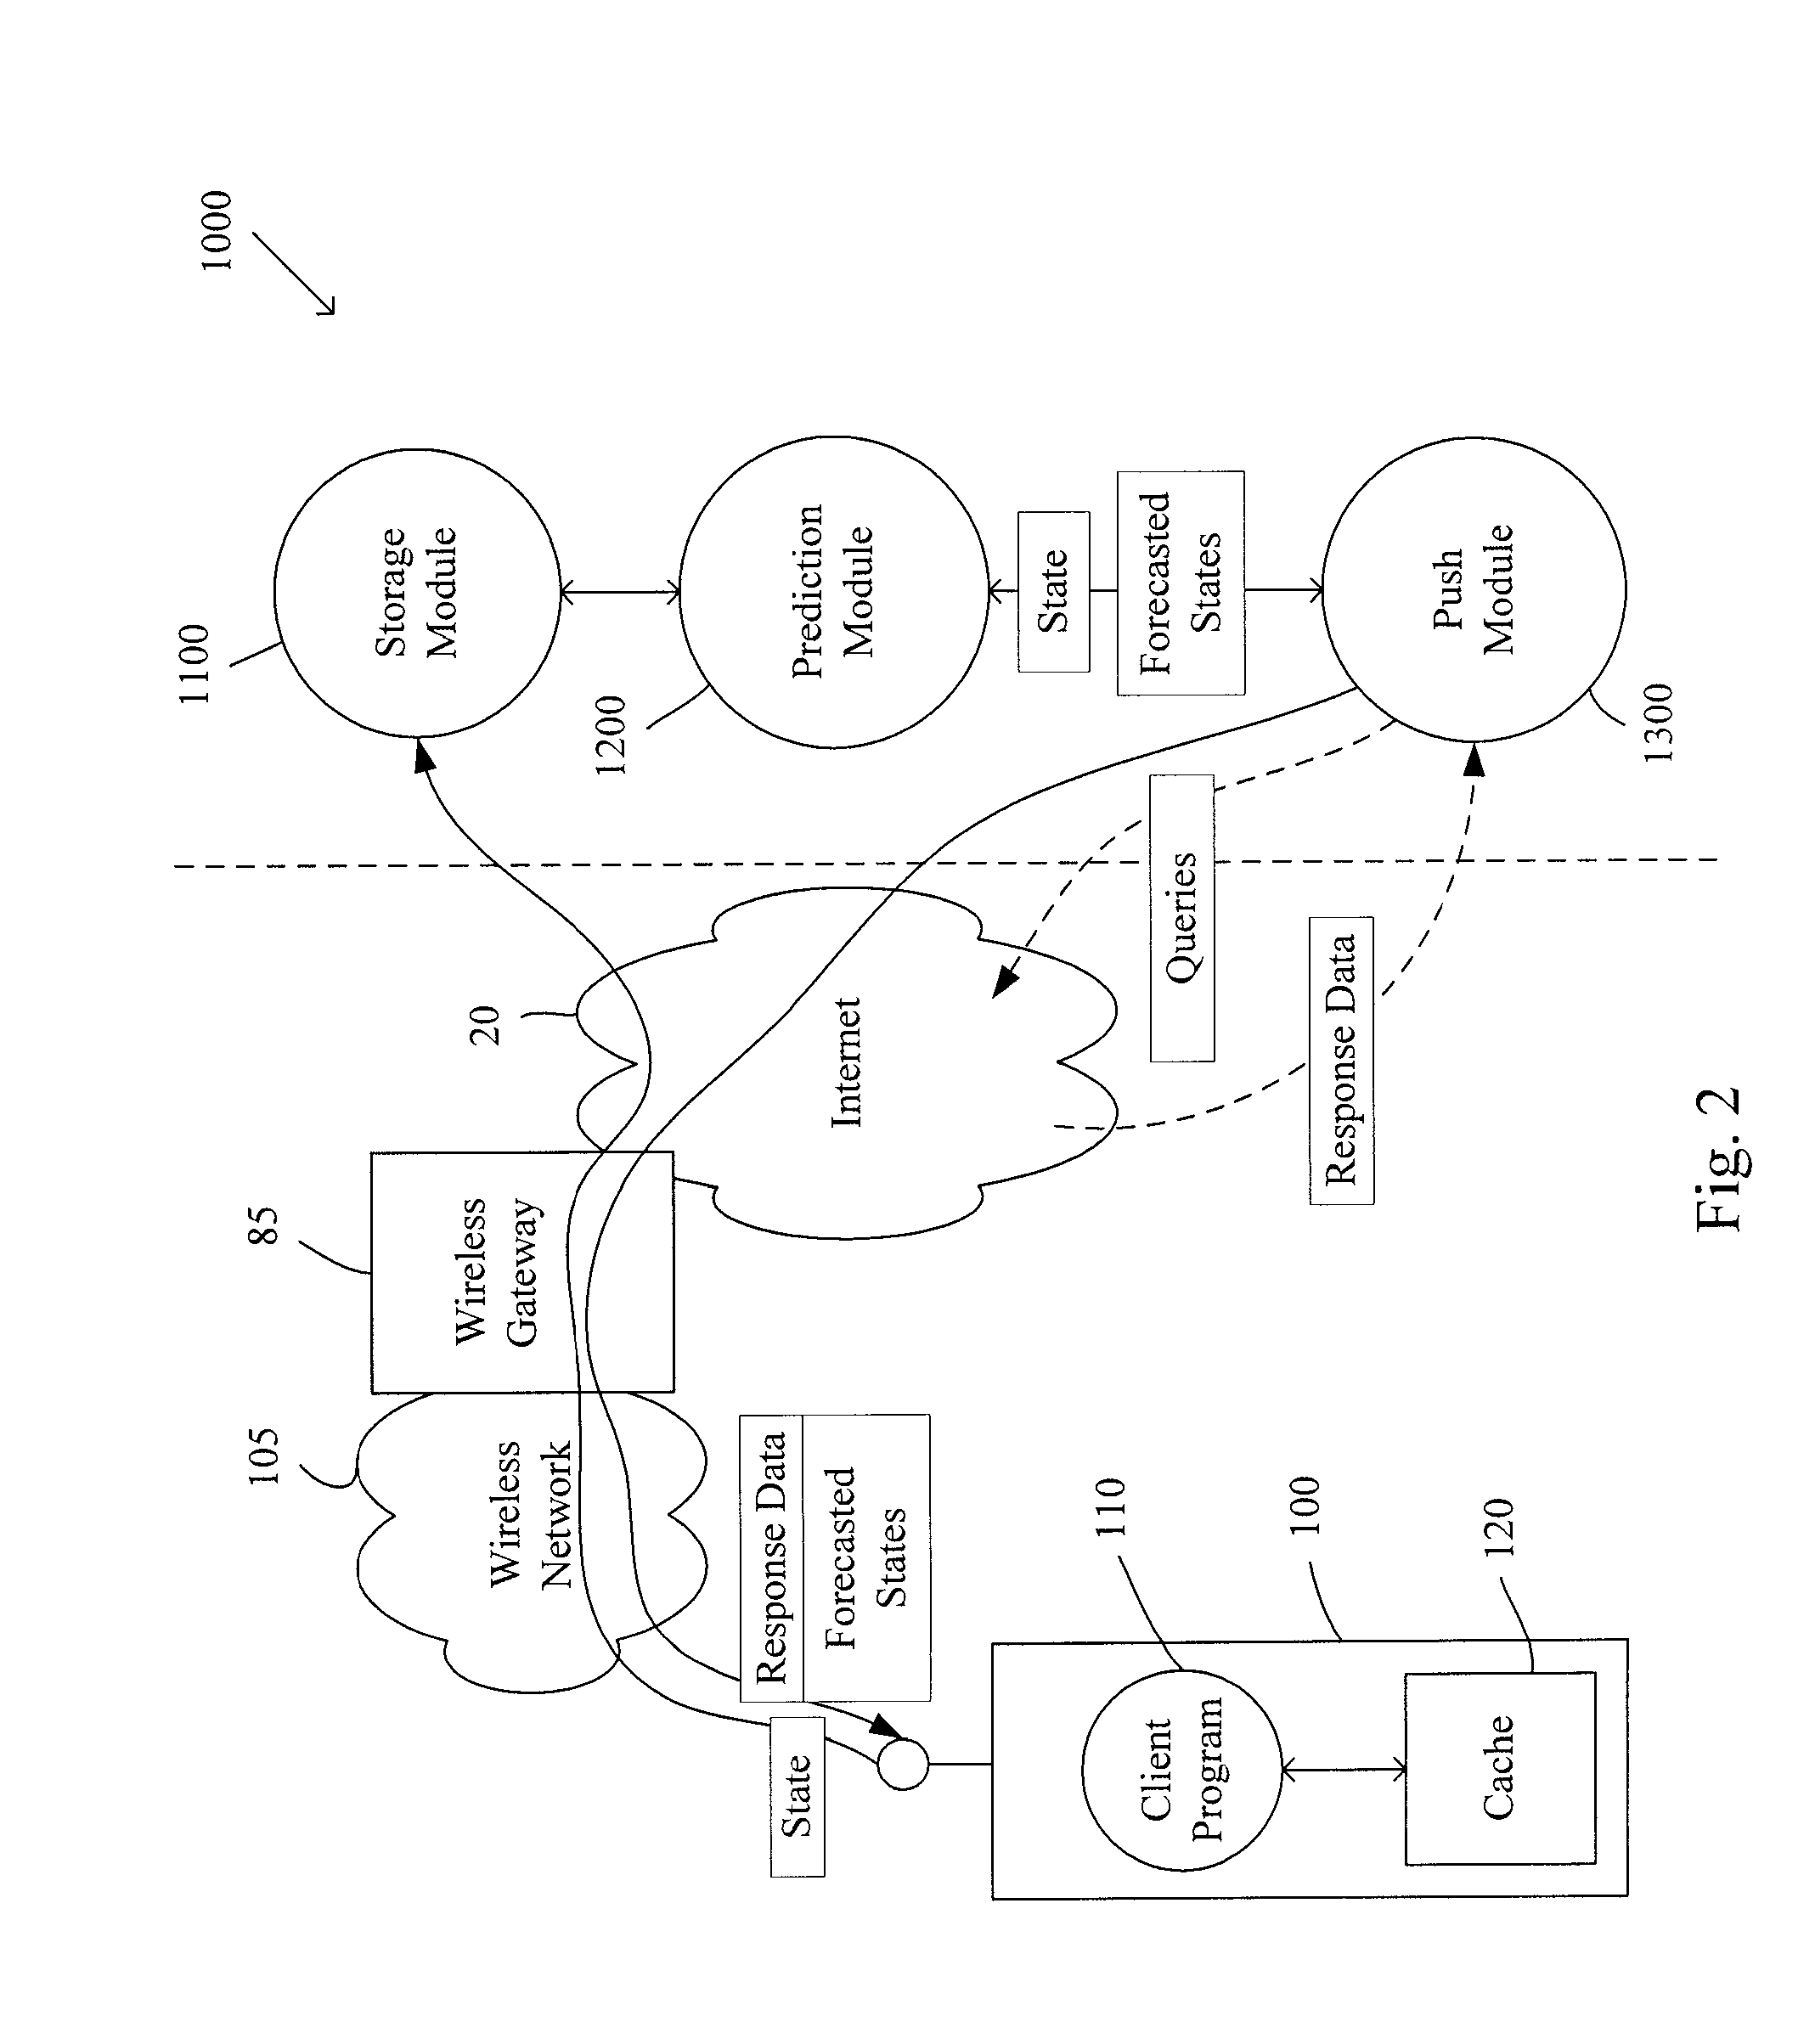 System and Method for Pushing Data to a Mobile Device